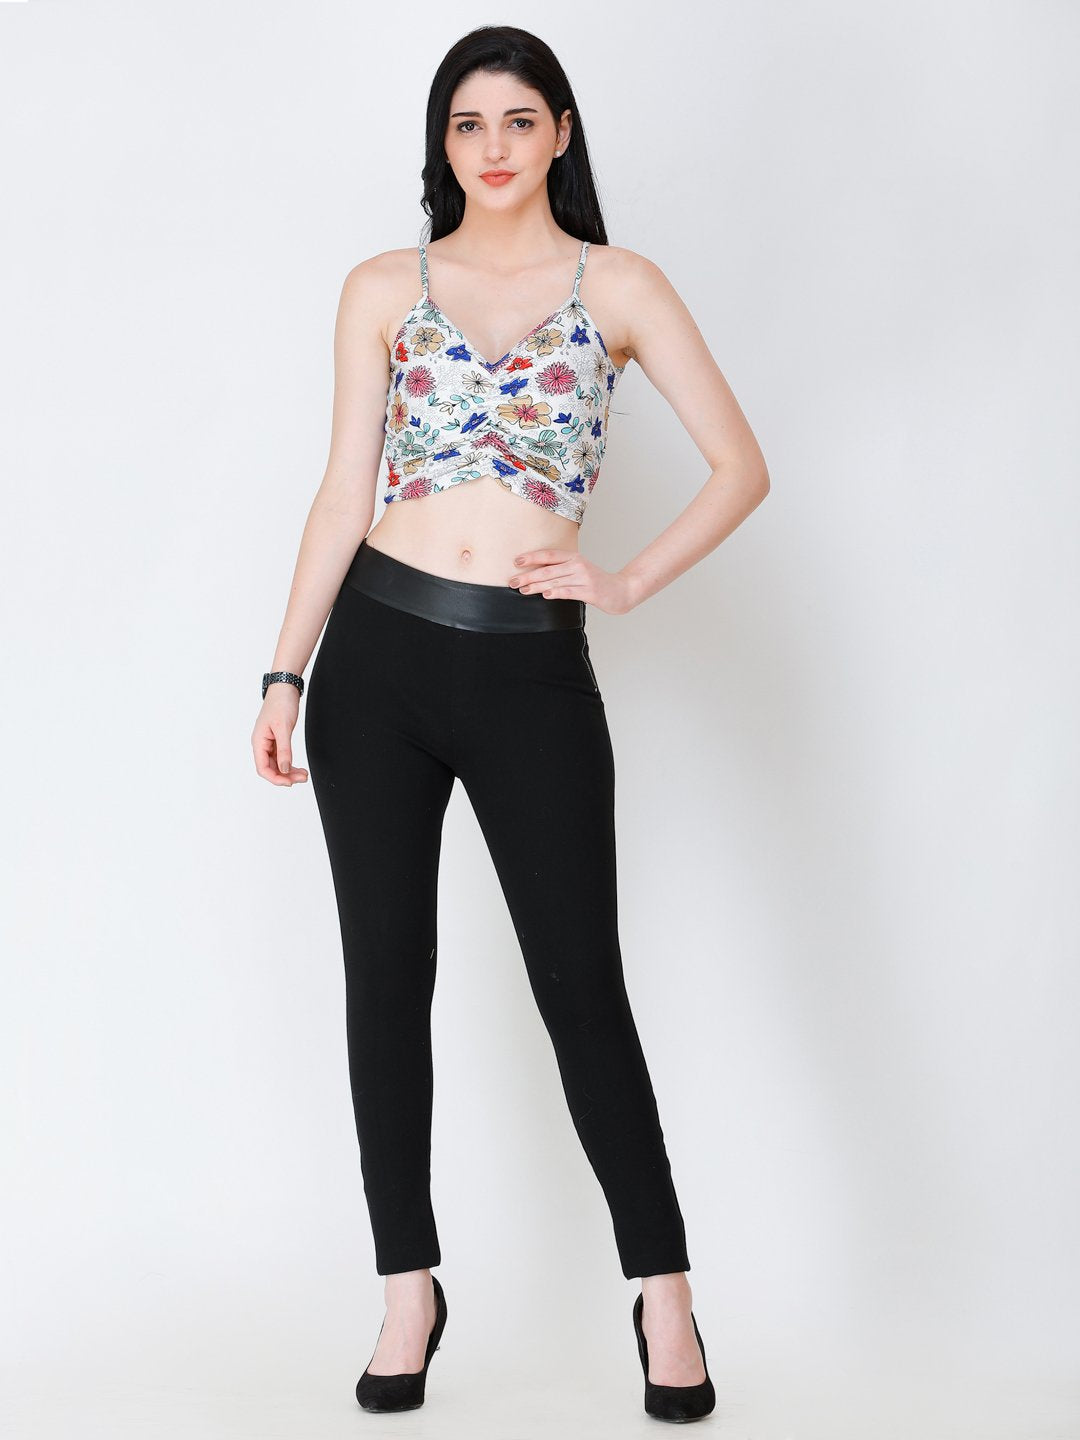 SCORPIUS printed front style crop top